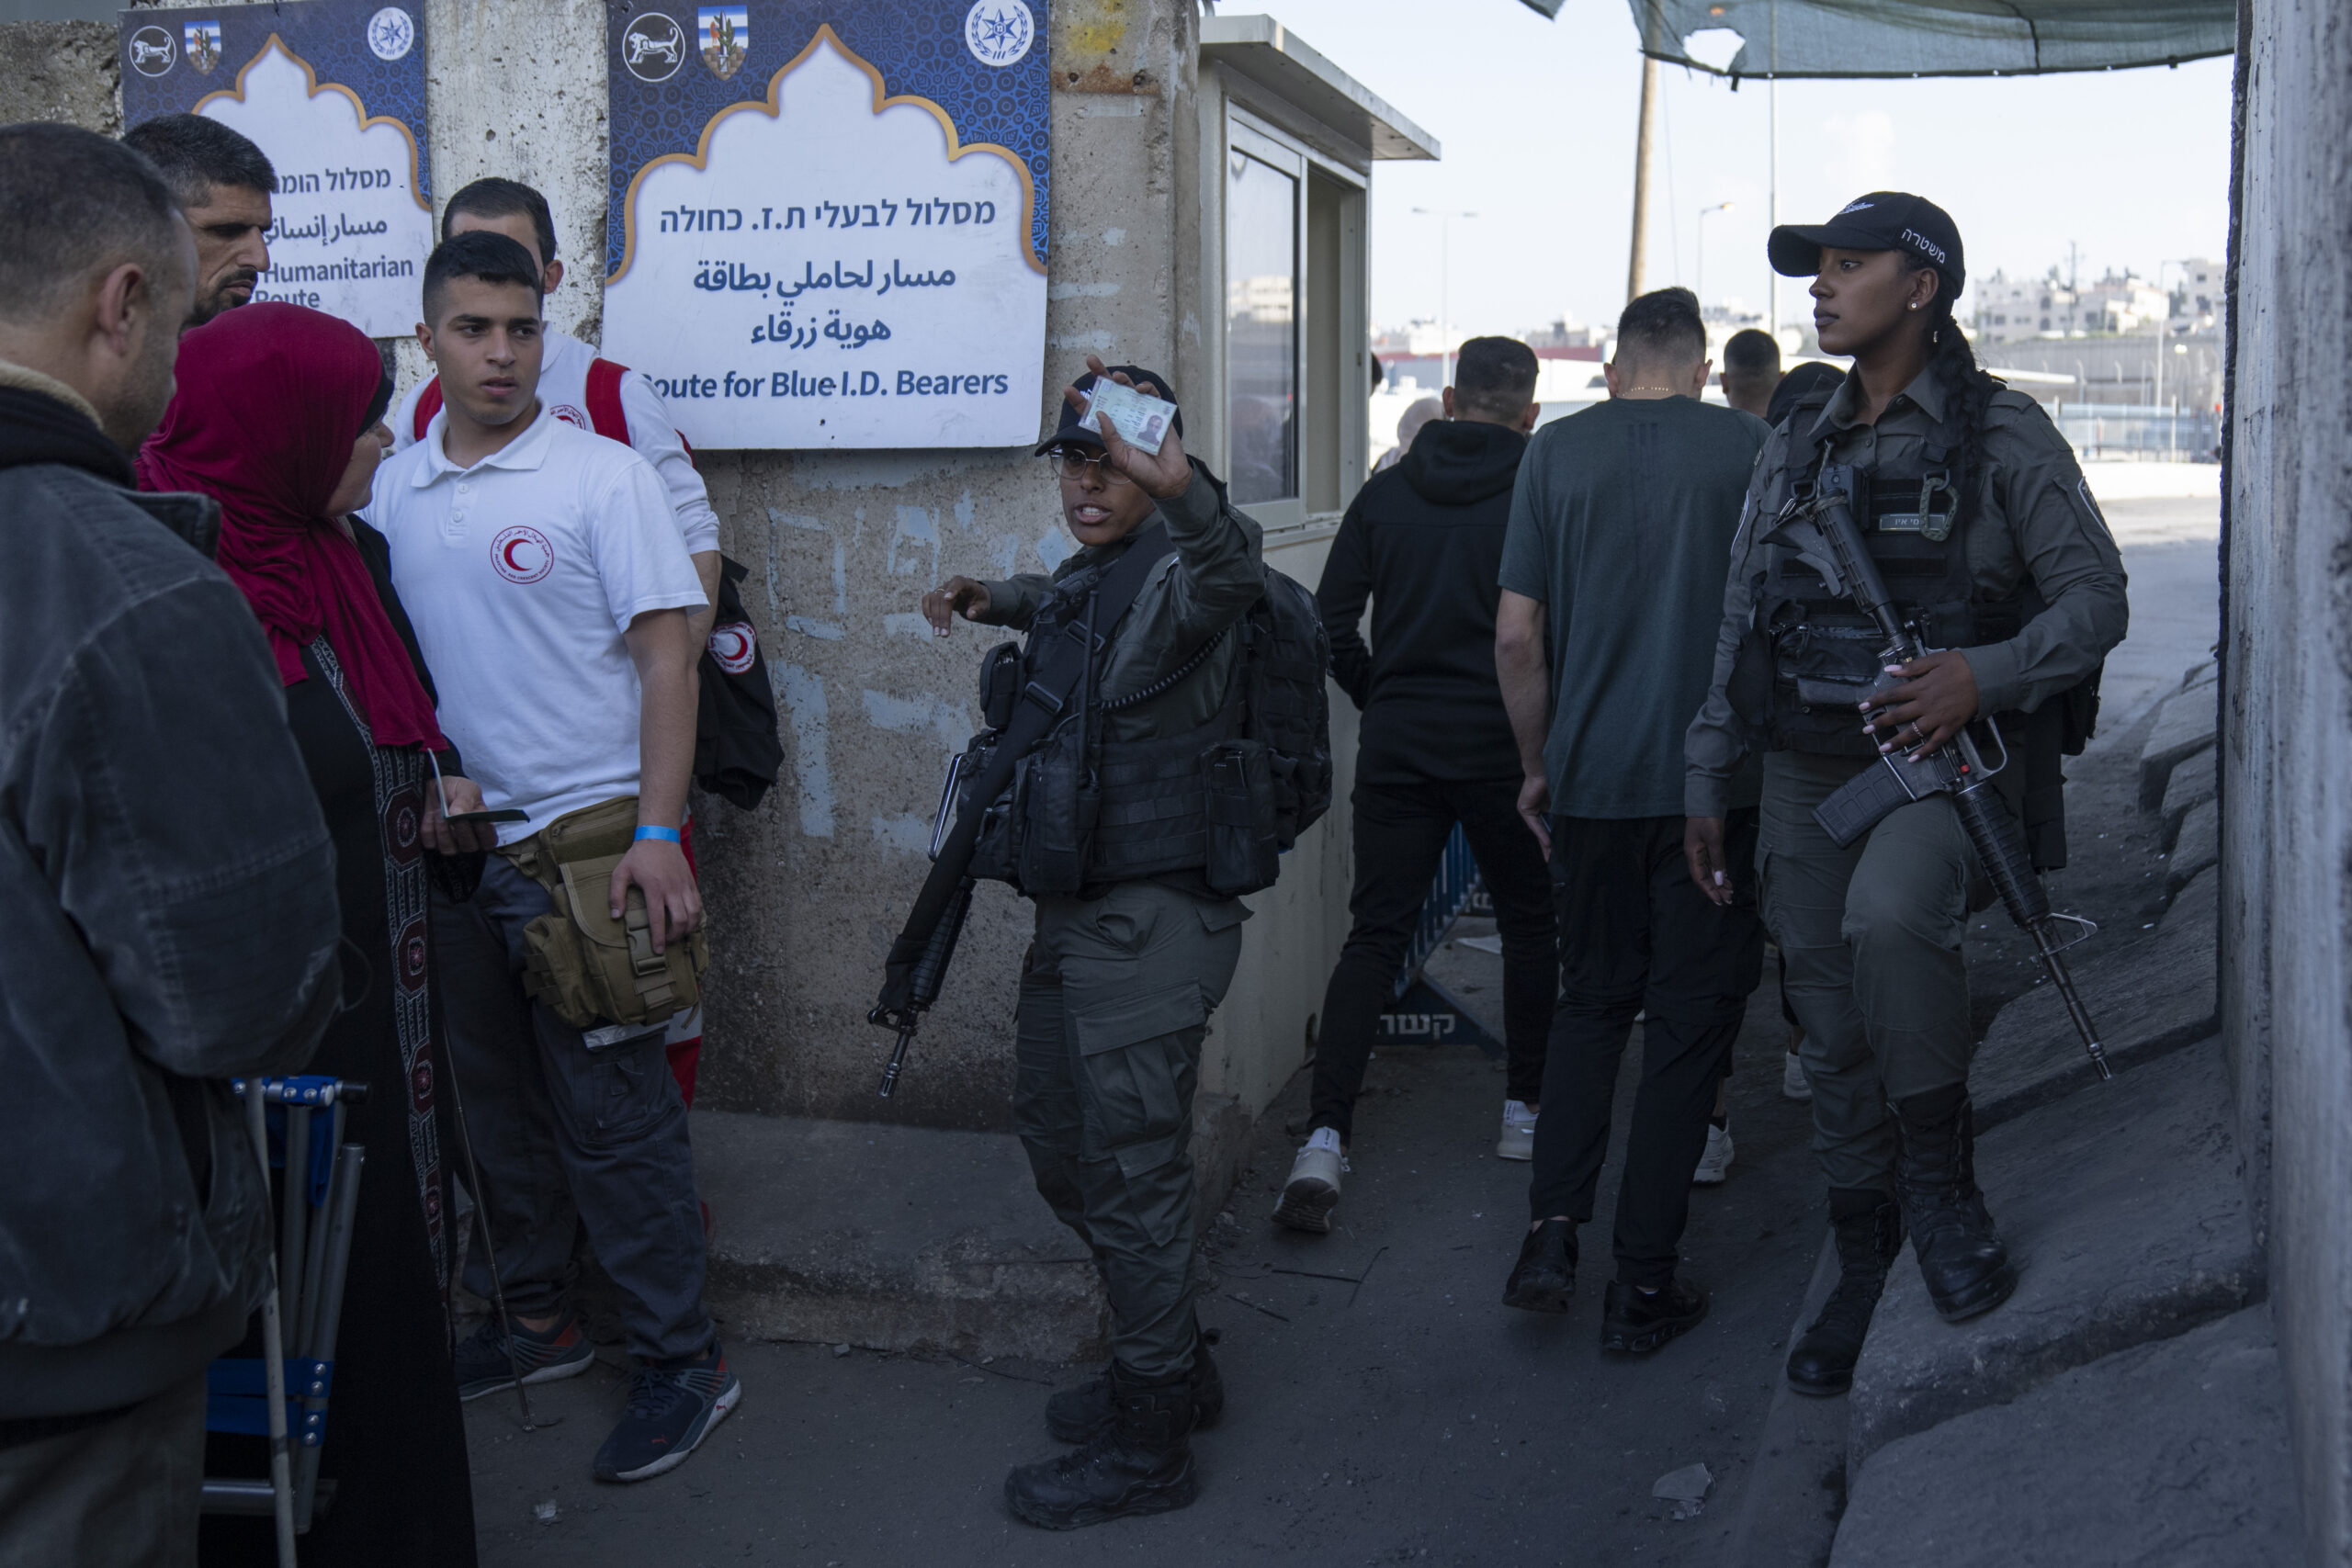 Israeli border police officers check identification cards of Palestinians while they try to cross from the occupied West Bank into Jerusalem, to pray during the holiest night of Ramadan, Laylat al-Qadr, or the "Night of Destiny," when Muslims believe that the Quran was revealed to the Prophet Mohammad, in the Al Aqsa mosque compound, at the Israeli military Qalandiya checkpoint, near Ramallah, Monday, April 17, 2023. Hundreds of thousands of Palestinians are barred from legally crossing into the contested capital, with most men under 55 years old turned away at checkpoints, and compelled to resort to other, perilous means to get to Al-Aqsa. (AP Photo/Nasser Nasser)